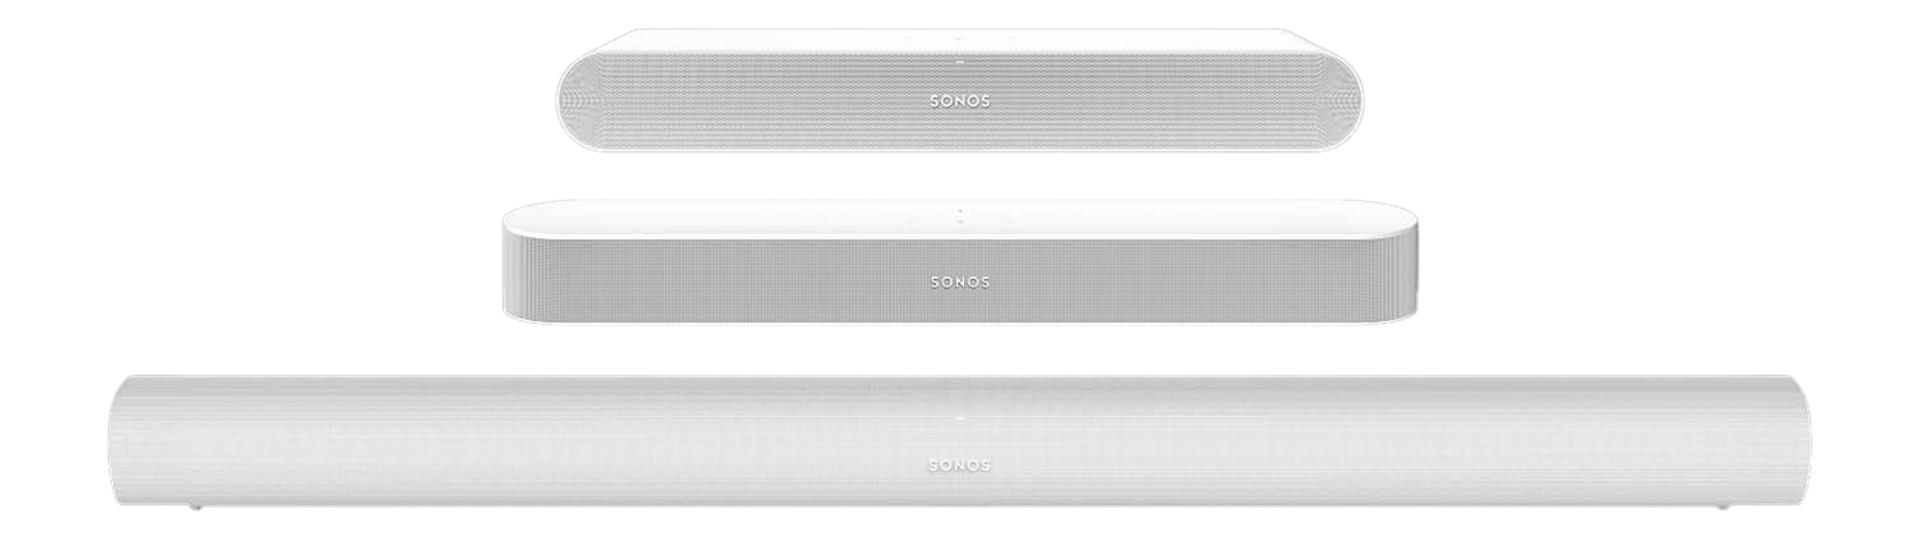 Expert review of the Sonos Beam (Gen 2) - Coolblue - anything for a smile